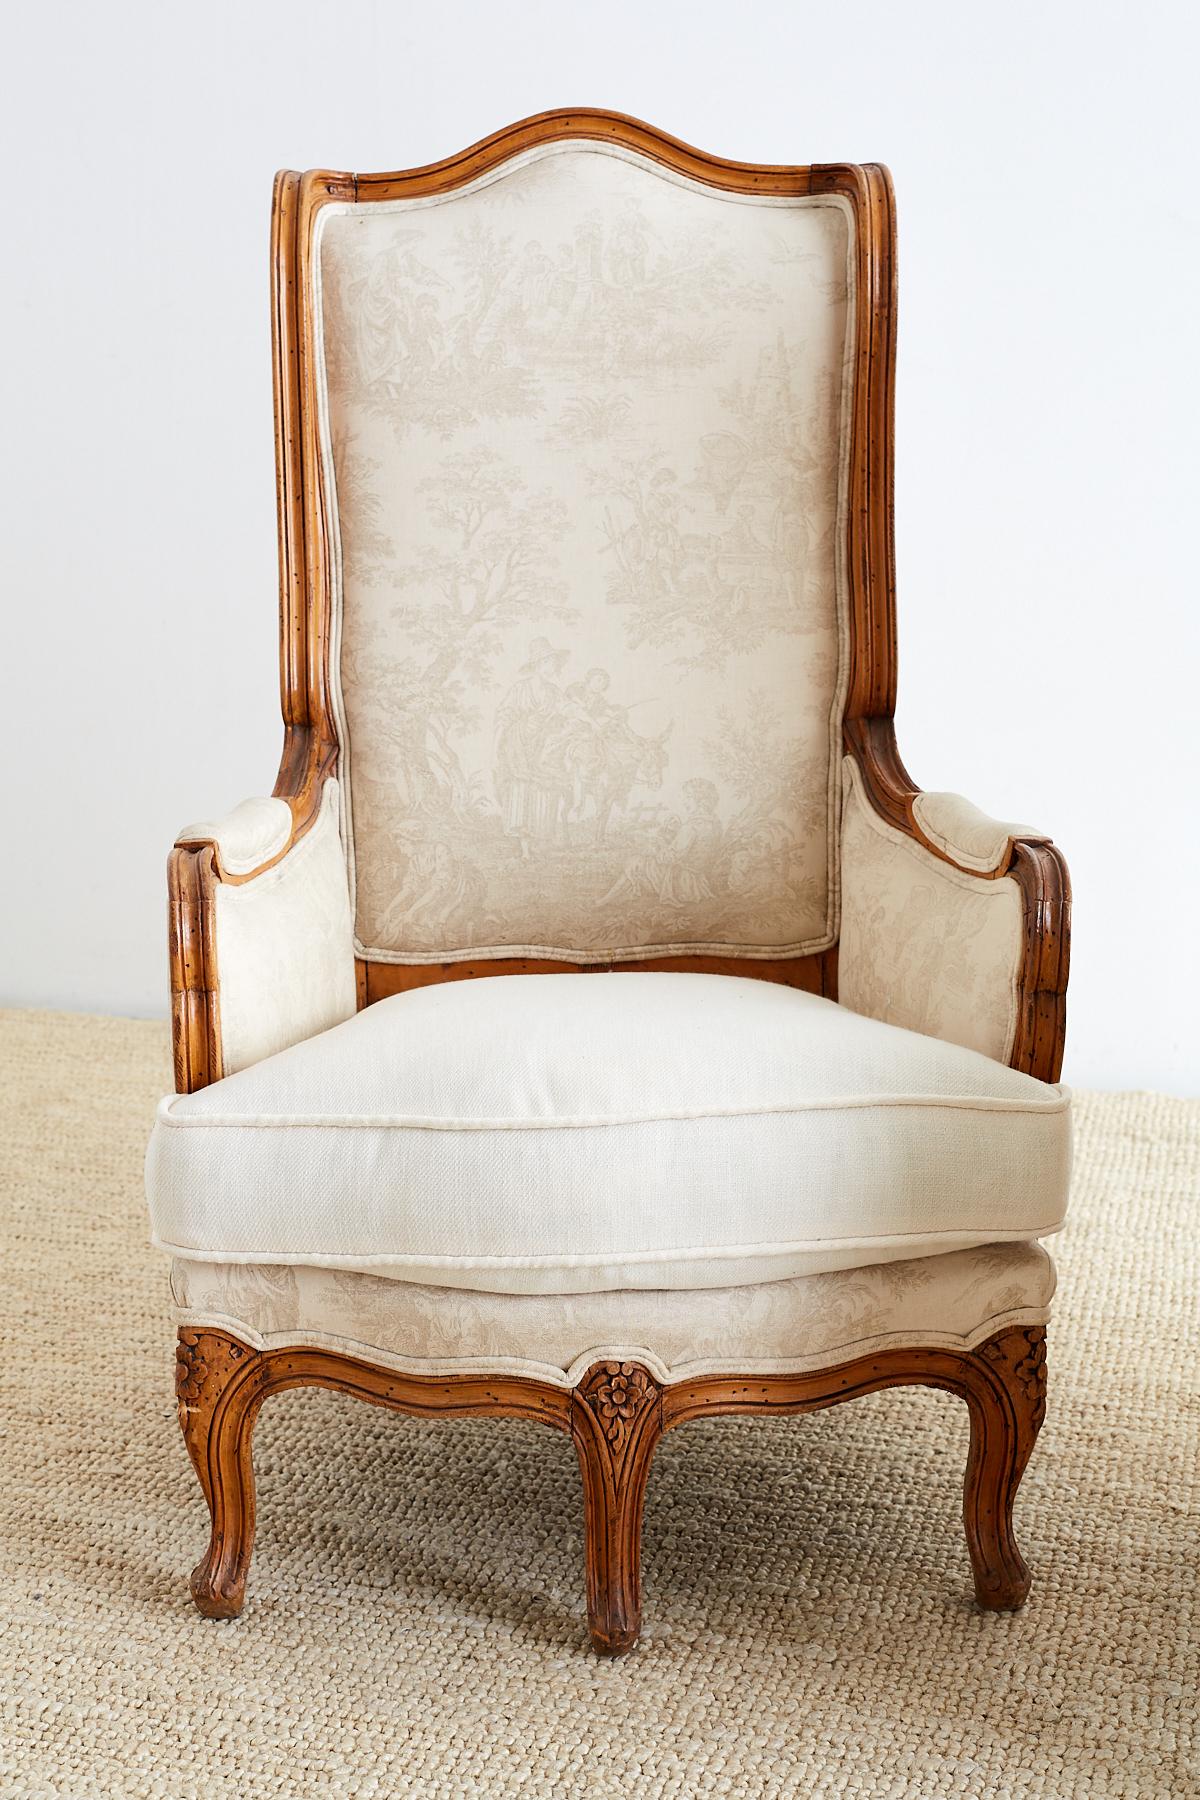 Charming and rare pair of five-legged French bergeres styled after the Louis XV taste during the Napoleon III period. Featuring a toile de jouy upholstery depicting French country life. The frames showcase a unique whimsical craftsmanship with small